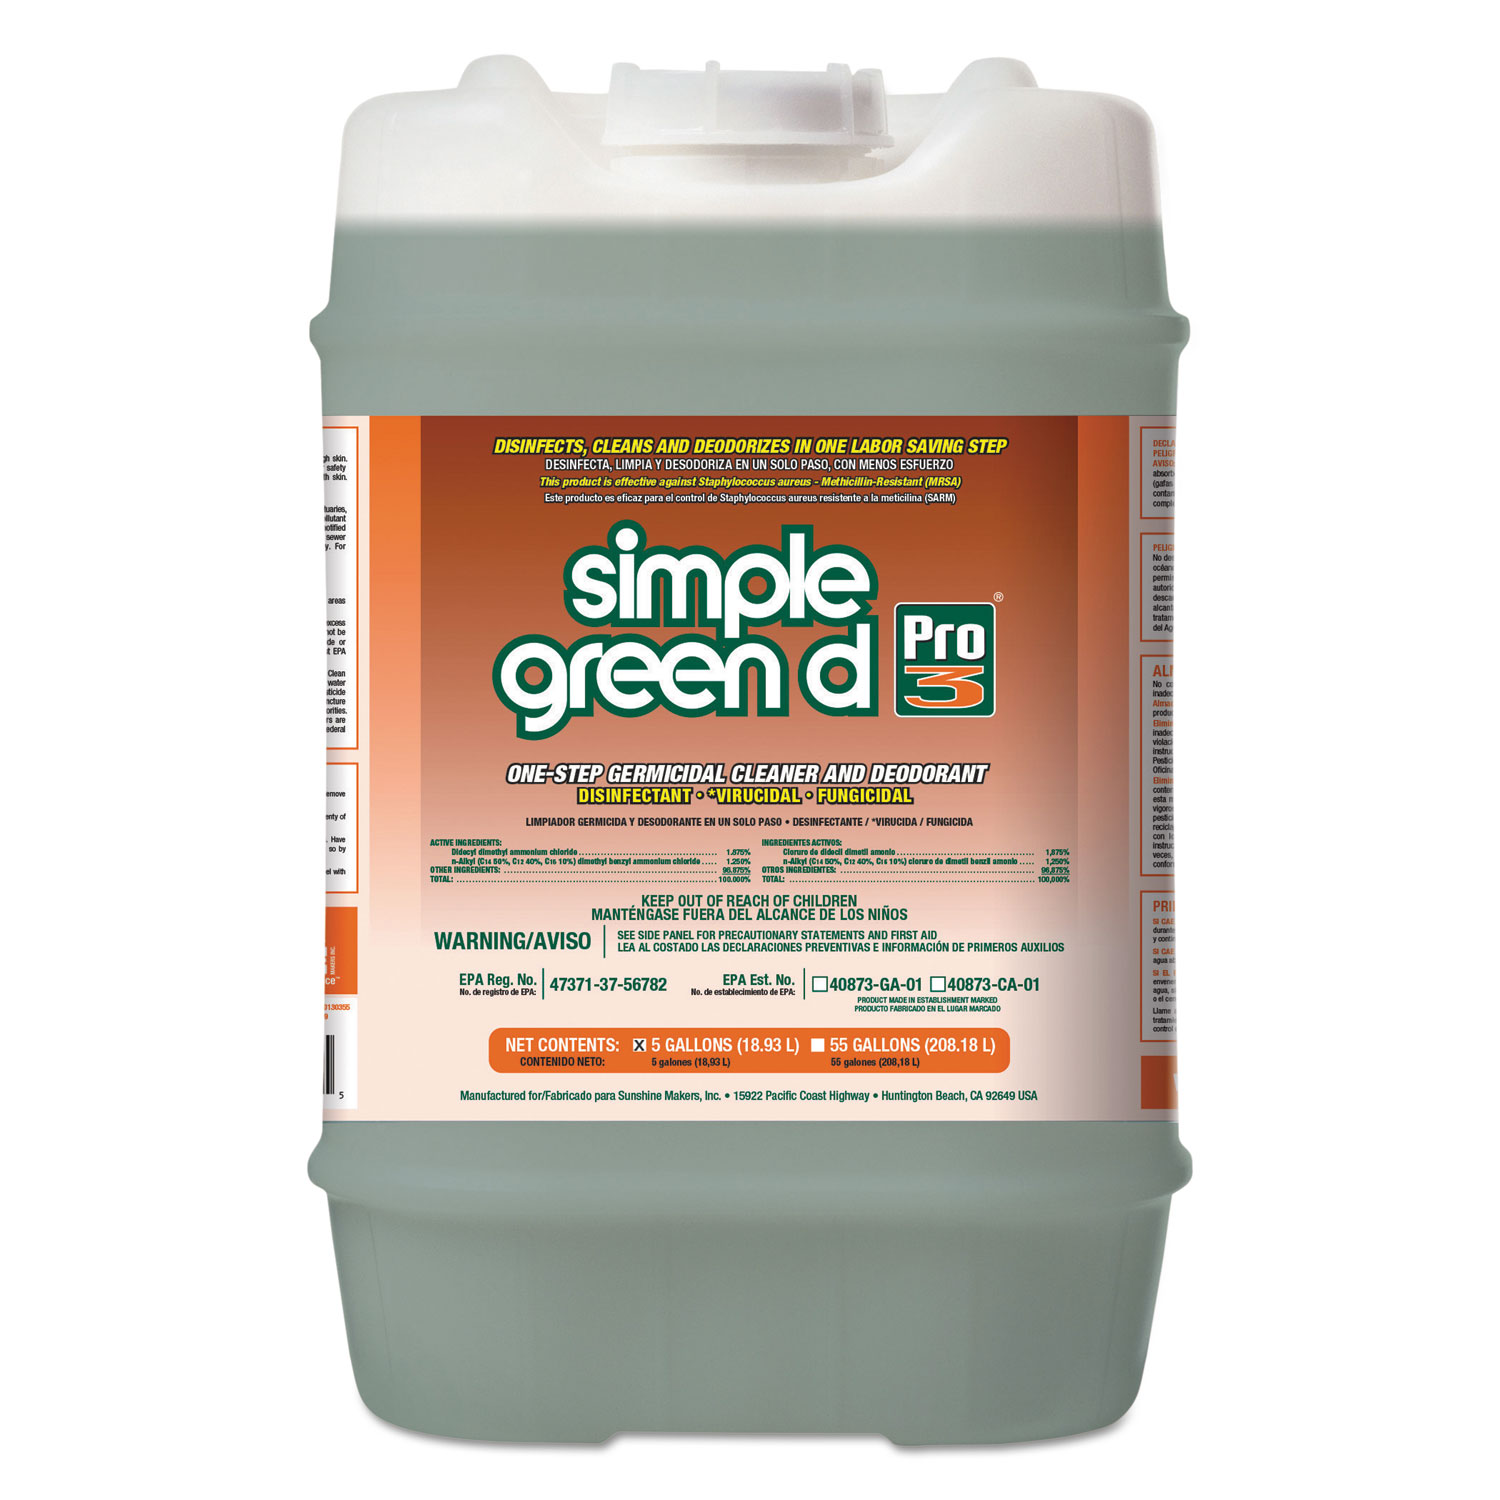 d Pro 3 One-Step Germicidal Cleaner and Deodorant, 5 gal Pail